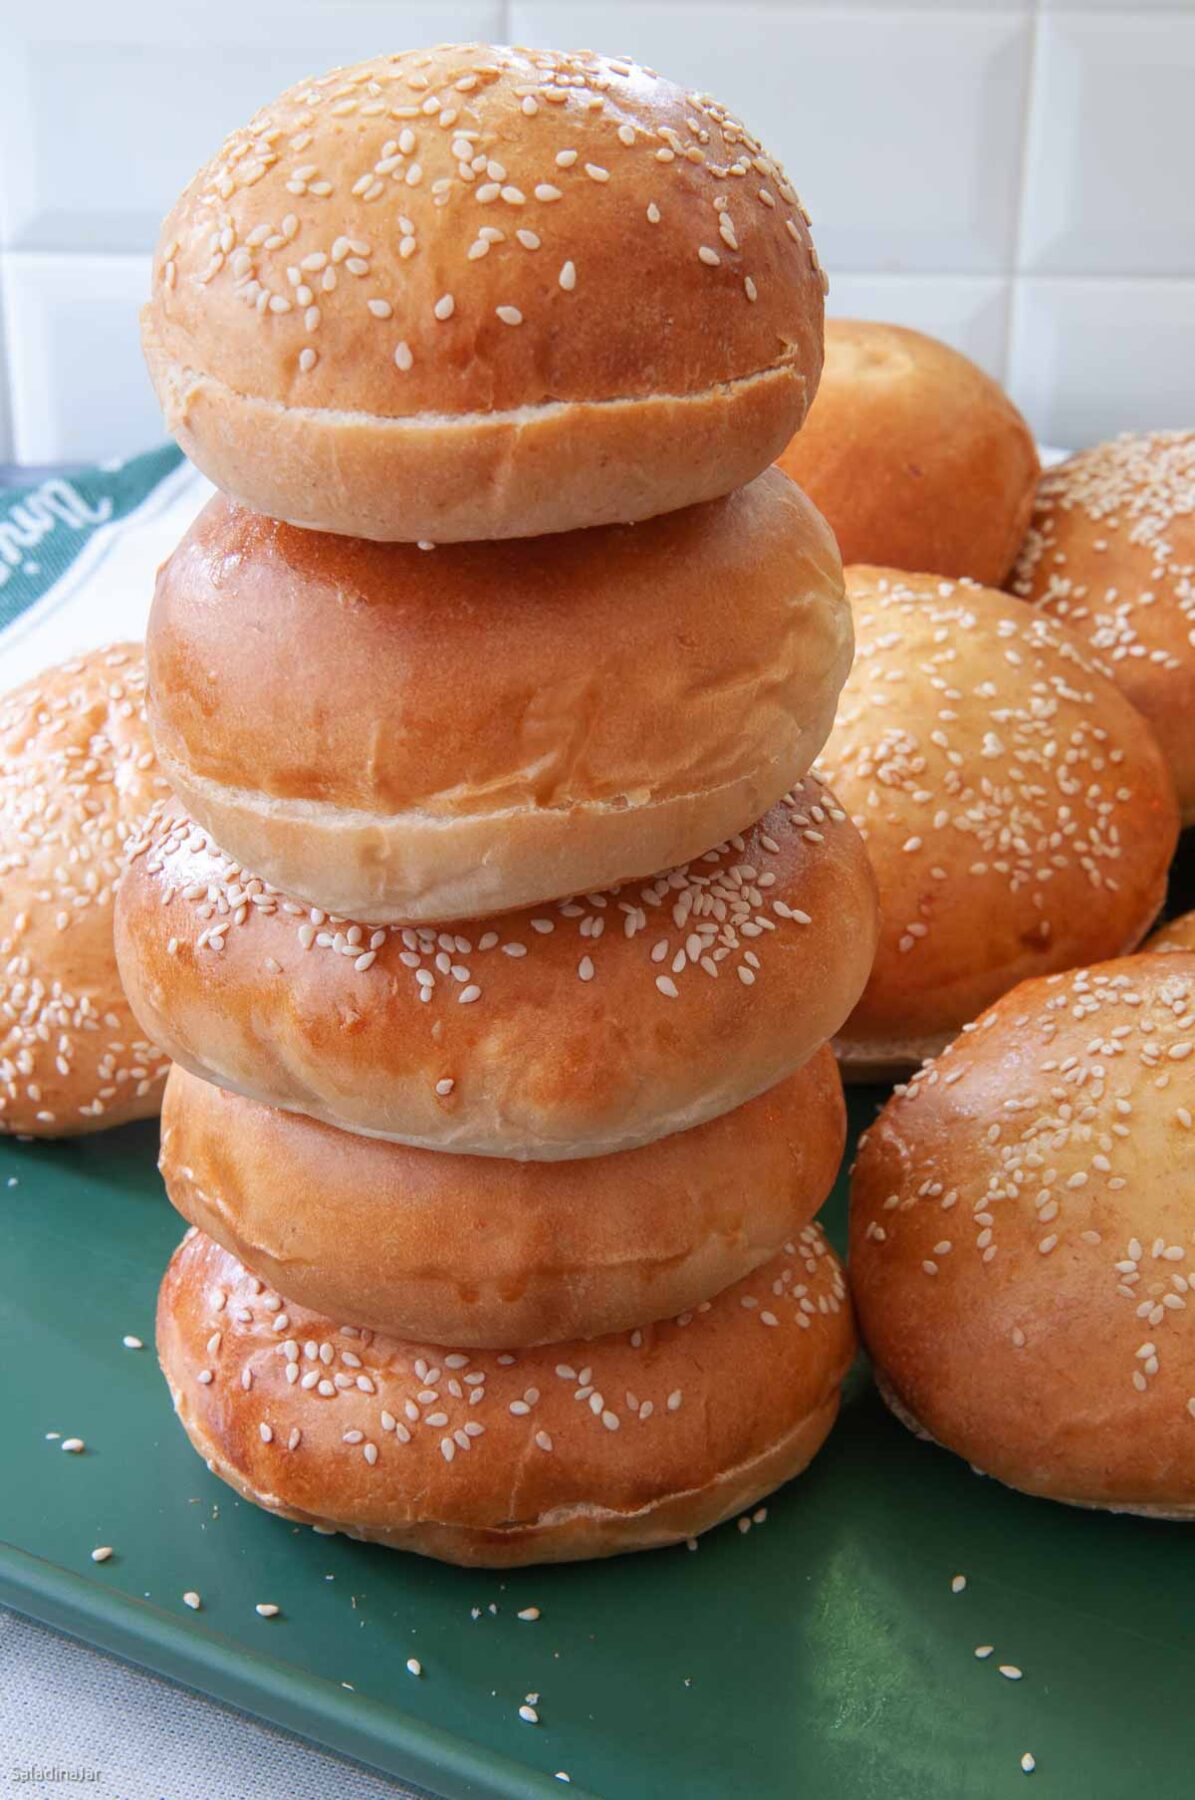 stack of burger buns--some with sesame seeds, others plain.